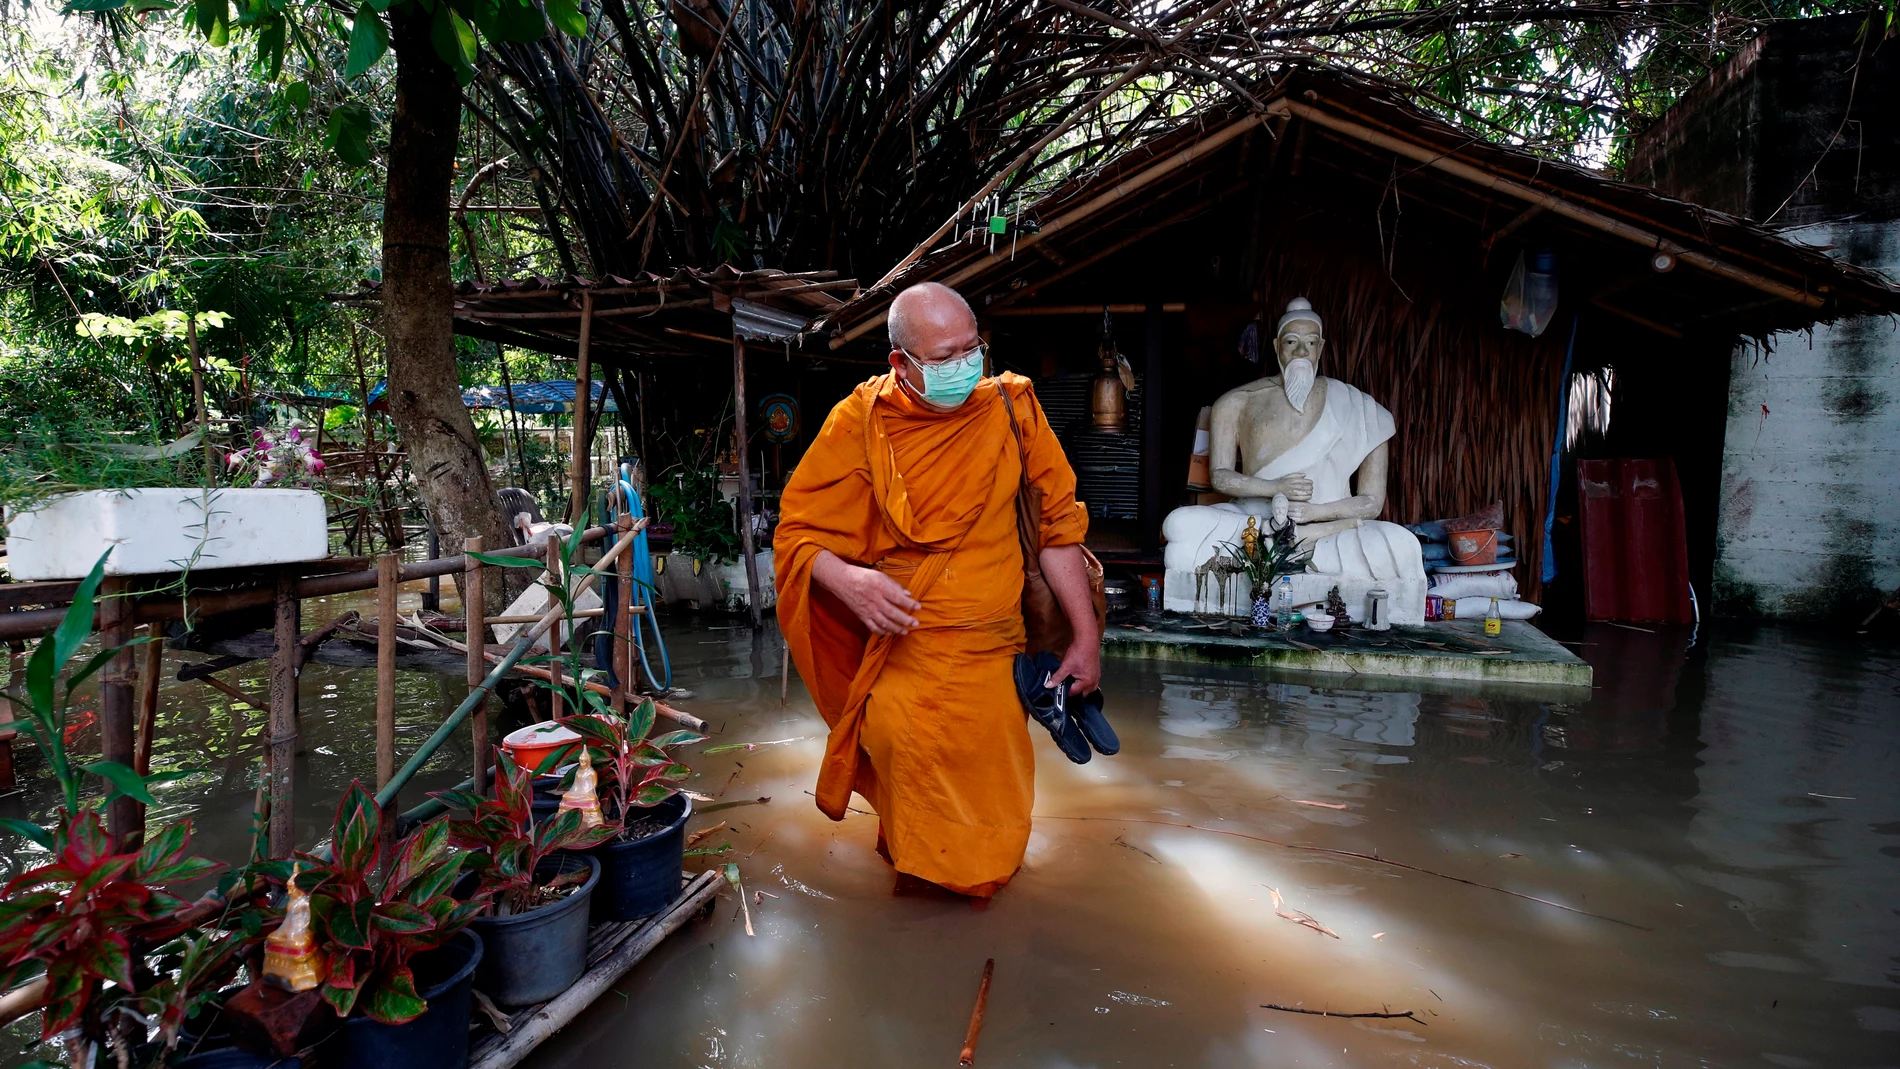 Koh Kret (Thailand), 05/10/2021.- A Thai Buddhist monk wades through floodwater at a flooded temple's monk dwelling in Koh Kret community, Nonthaburi neighboring province of Bangkok, Thailand, 05 October 2021. Flooding caused by tropical storm Dianmu has swamped 32 provinces in several parts of Thailand, killed at least eight people and more than two hundreds thousands households have been affected, according to the Disaster Prevention and Mitigation Department. (Inundaciones, Tailandia, Estados Unidos) EFE/EPA/RUNGROJ YONGRIT